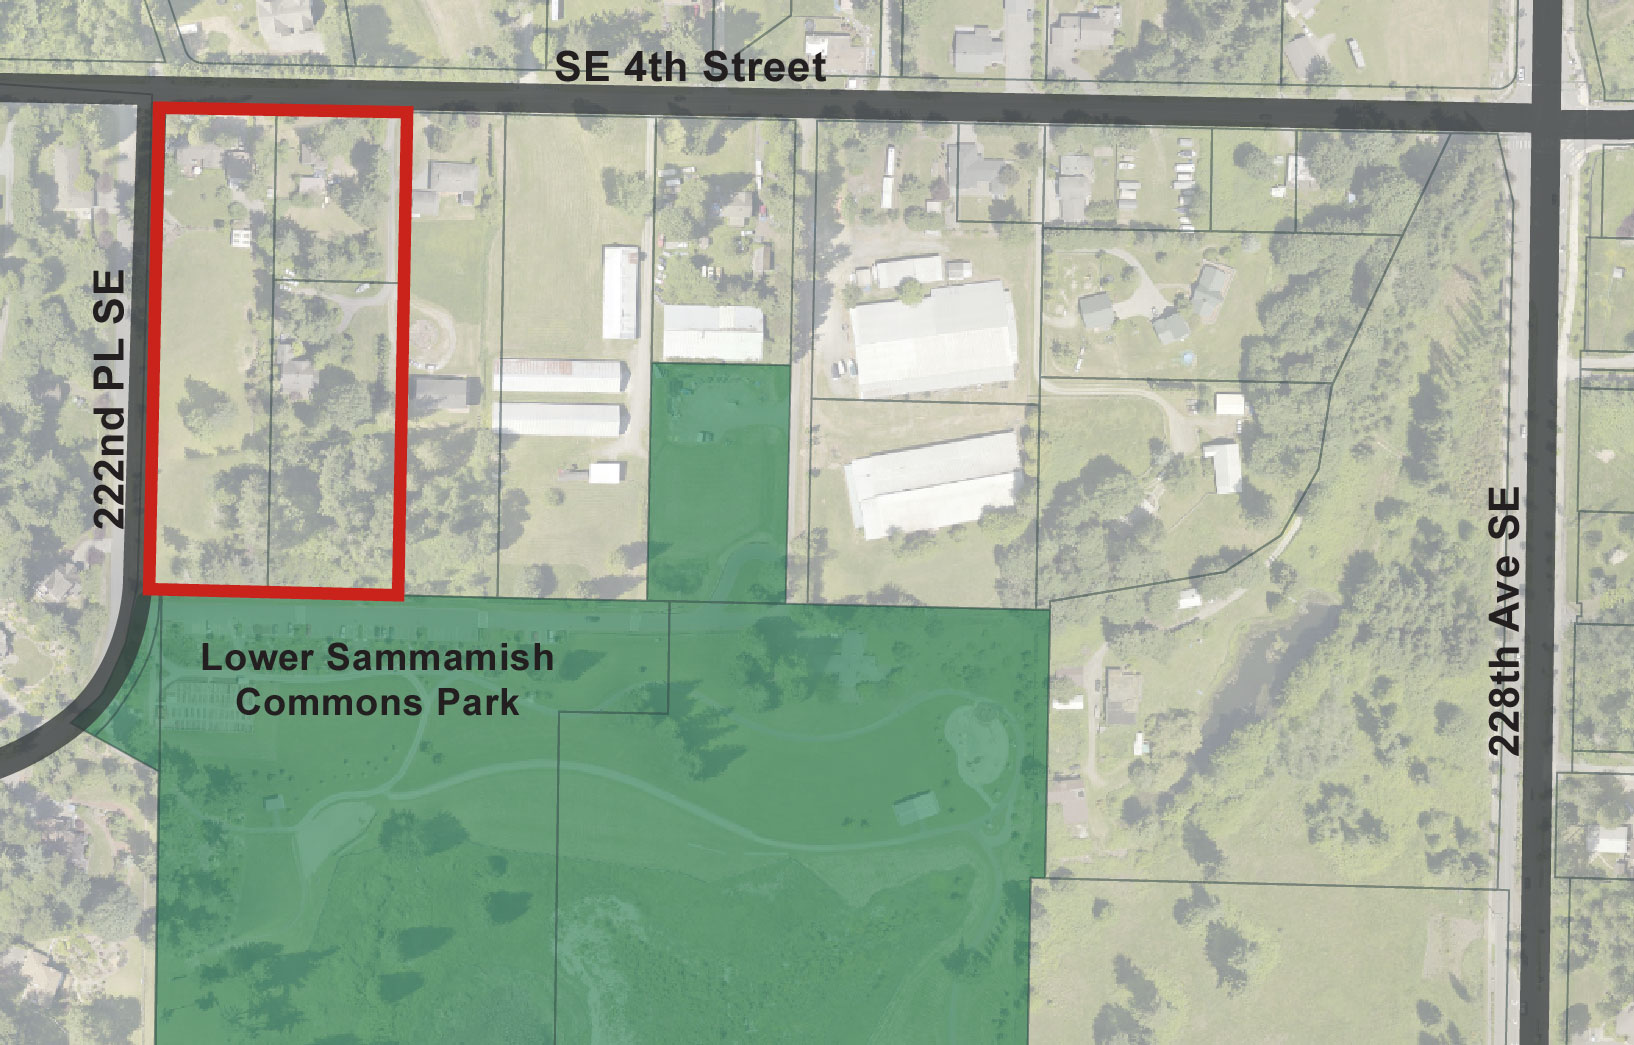 parcel map showing location of Brownstone West project over three parcels adjacent to Lower Sammamish Commons Park